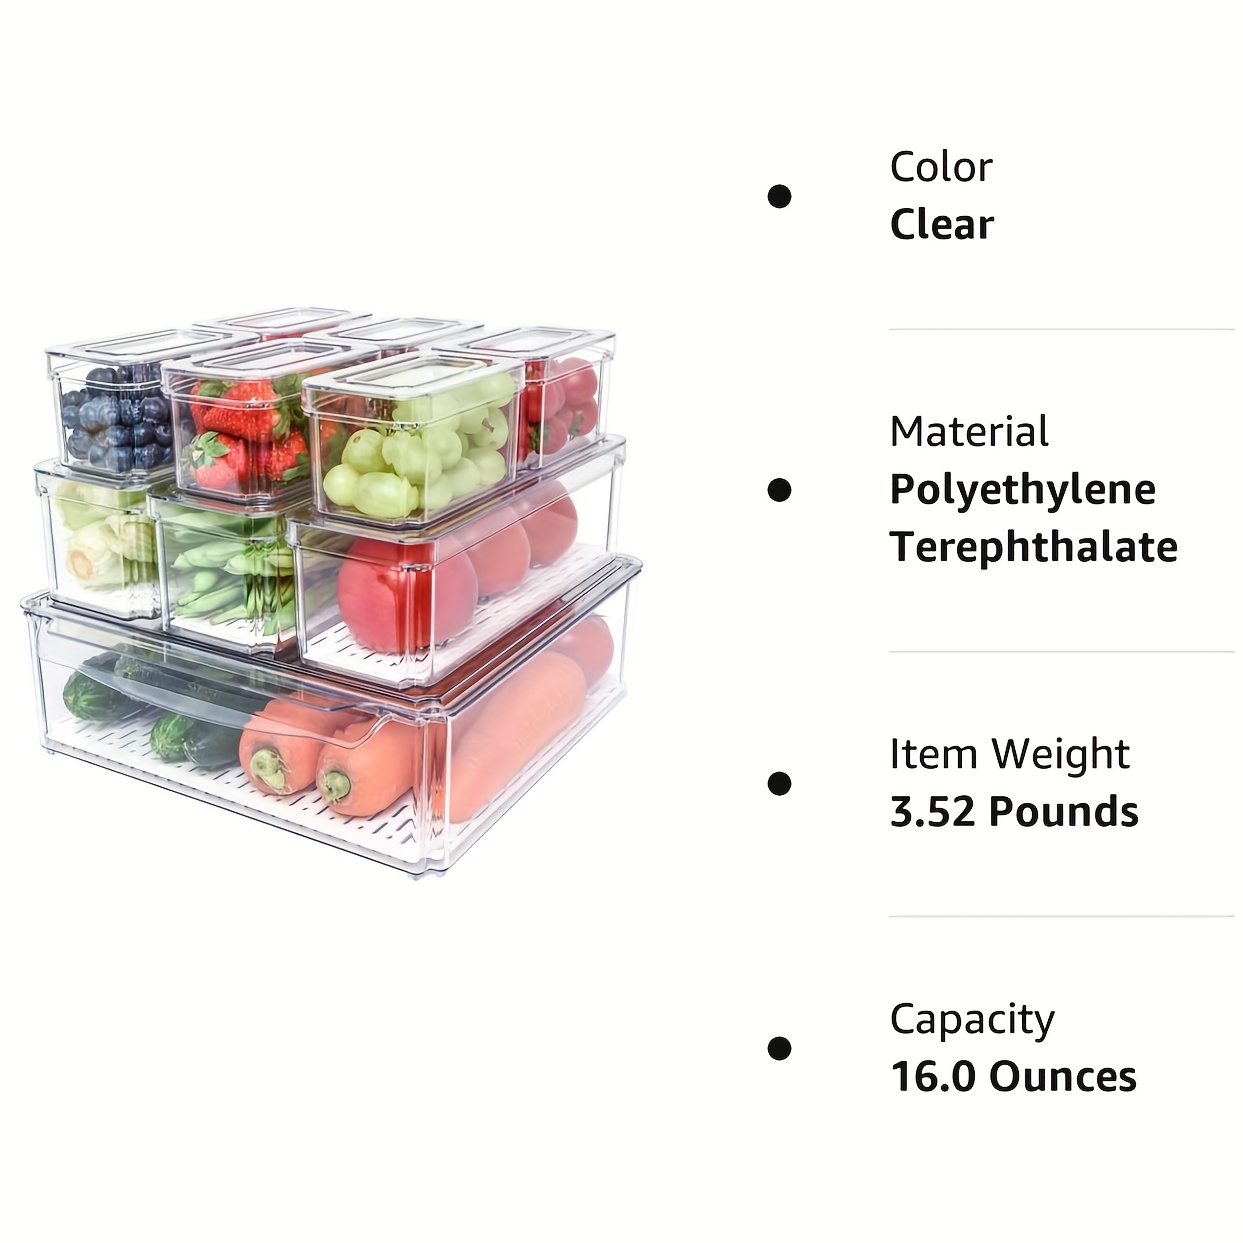 Fridge Organiser Set Of 8, Stackable Storage Box, Small Refrigerator  Organizer Bins With Handles For Kitchen, Freezer, Pantry, Cupboards - Clear  Bpa-f